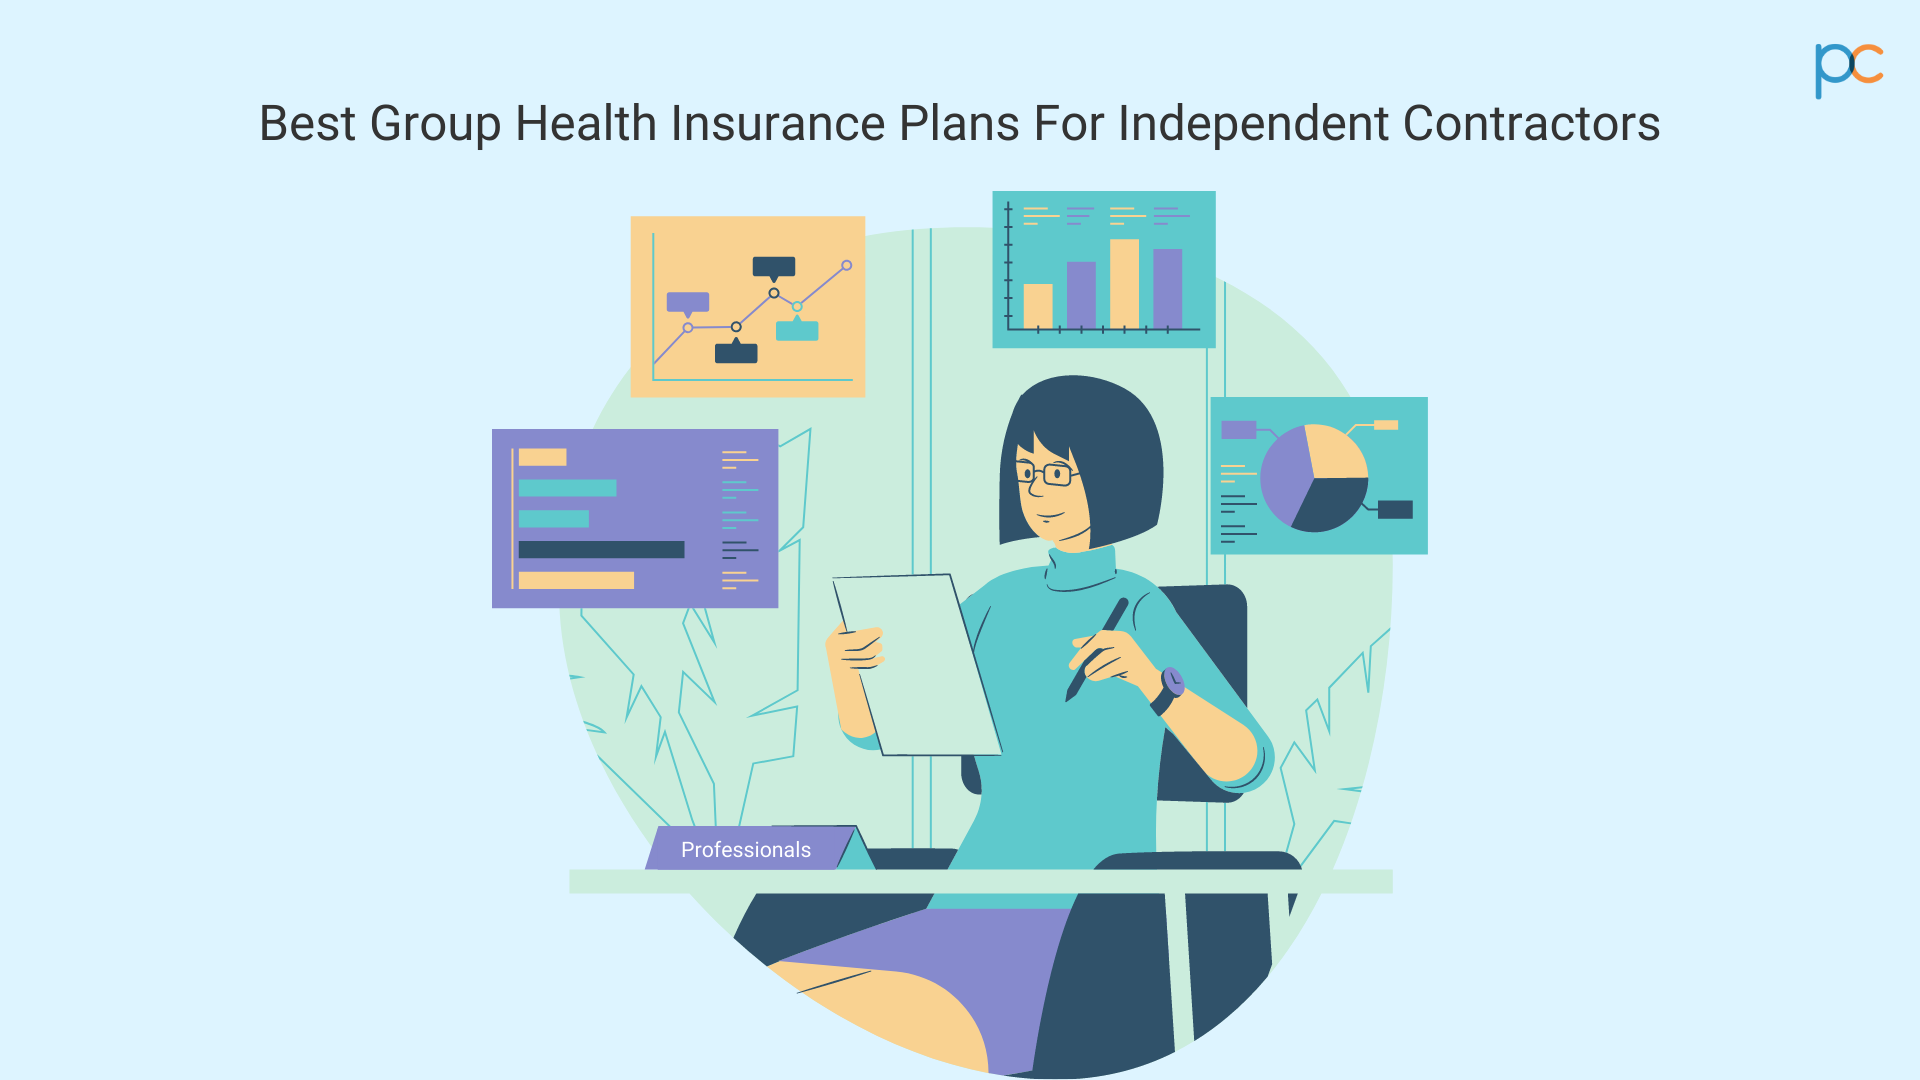 Best Group Health Insurance Plans For Independent Contractors